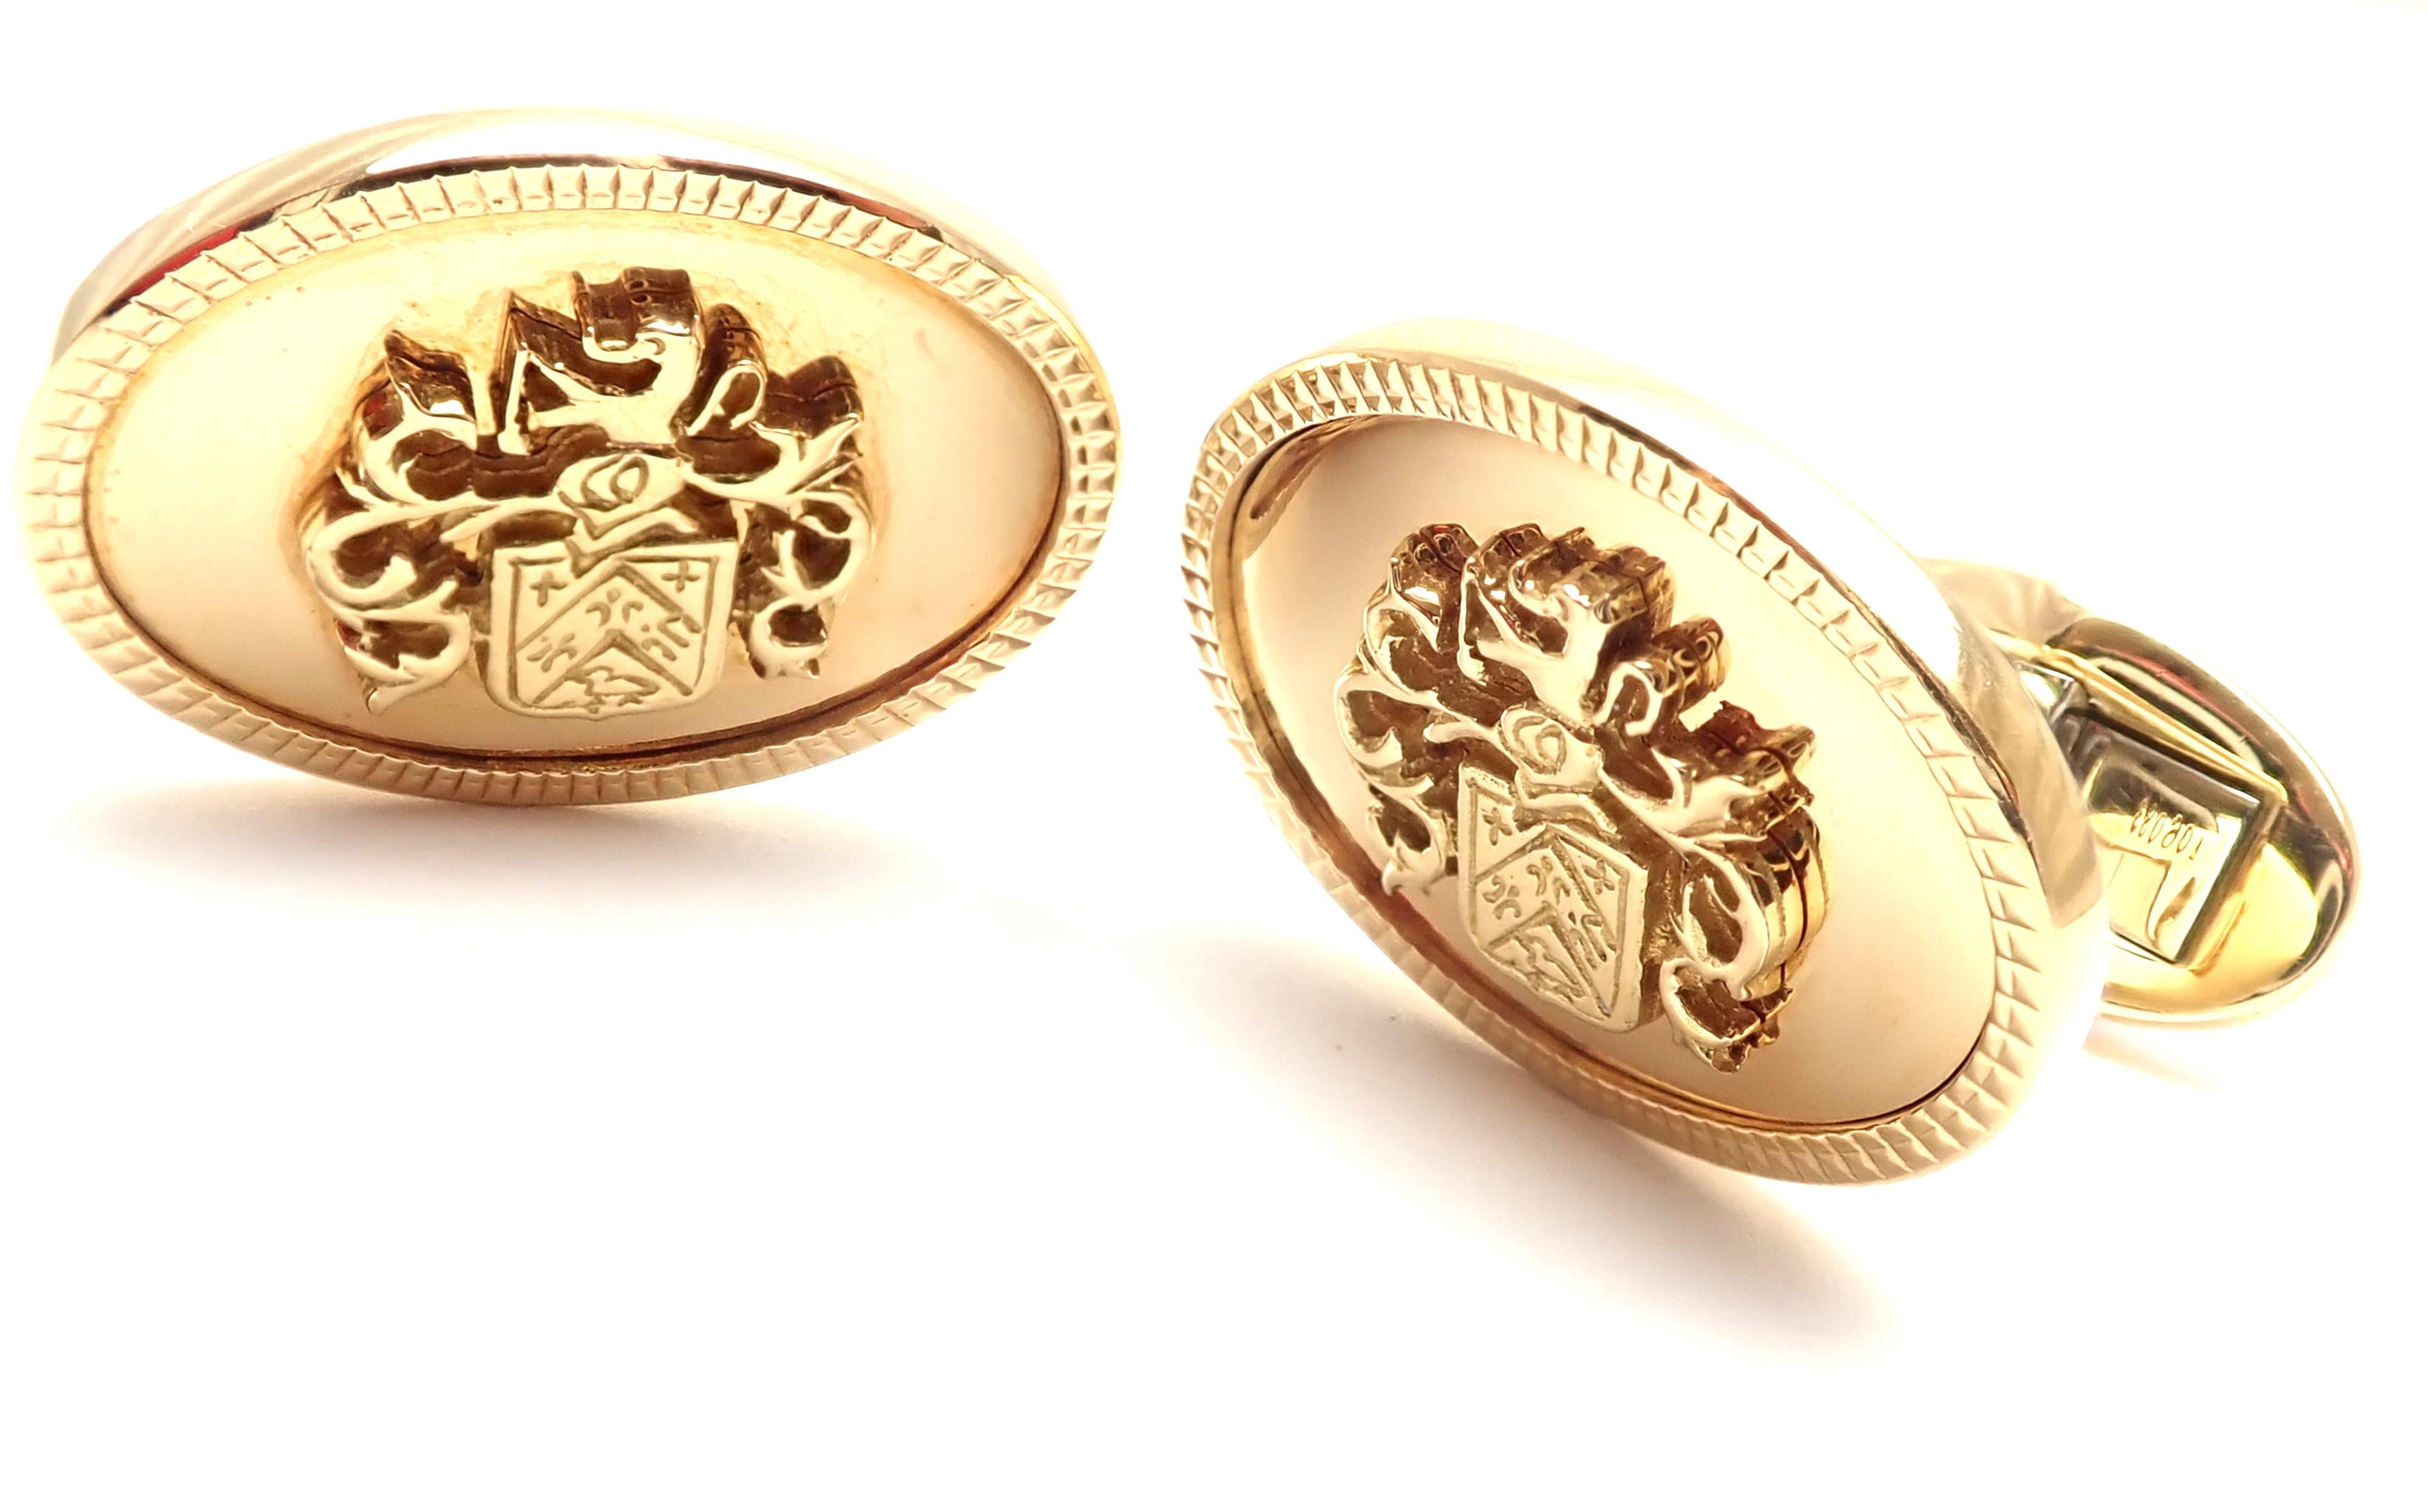 18k Yellow Gold Cufflinks by  Piaget. 
Details: 
Measurements: 21mm x 16mm
Weight: 22.4 grams
Stamped Hallmarks: Piaget 750 A06083
*Free Shipping within the United States*
YOUR PRICE: $2,950
T2161mmld